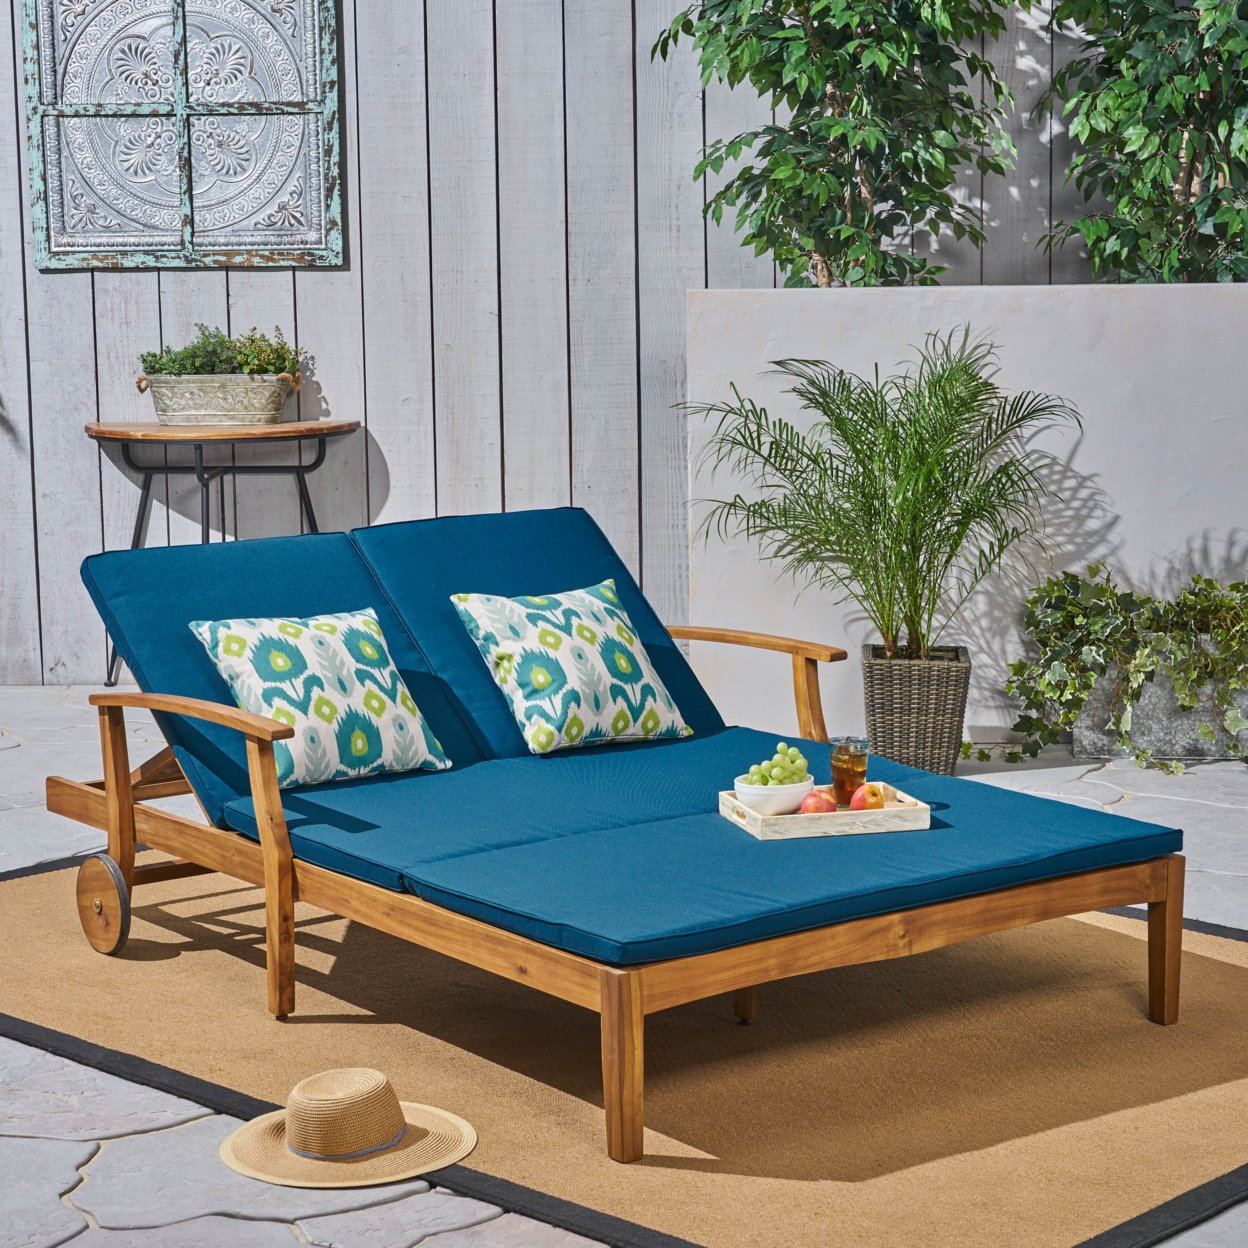 Samantha Double Chaise Lounge For Yard And Patio, Acacia Wood Frame - Blue